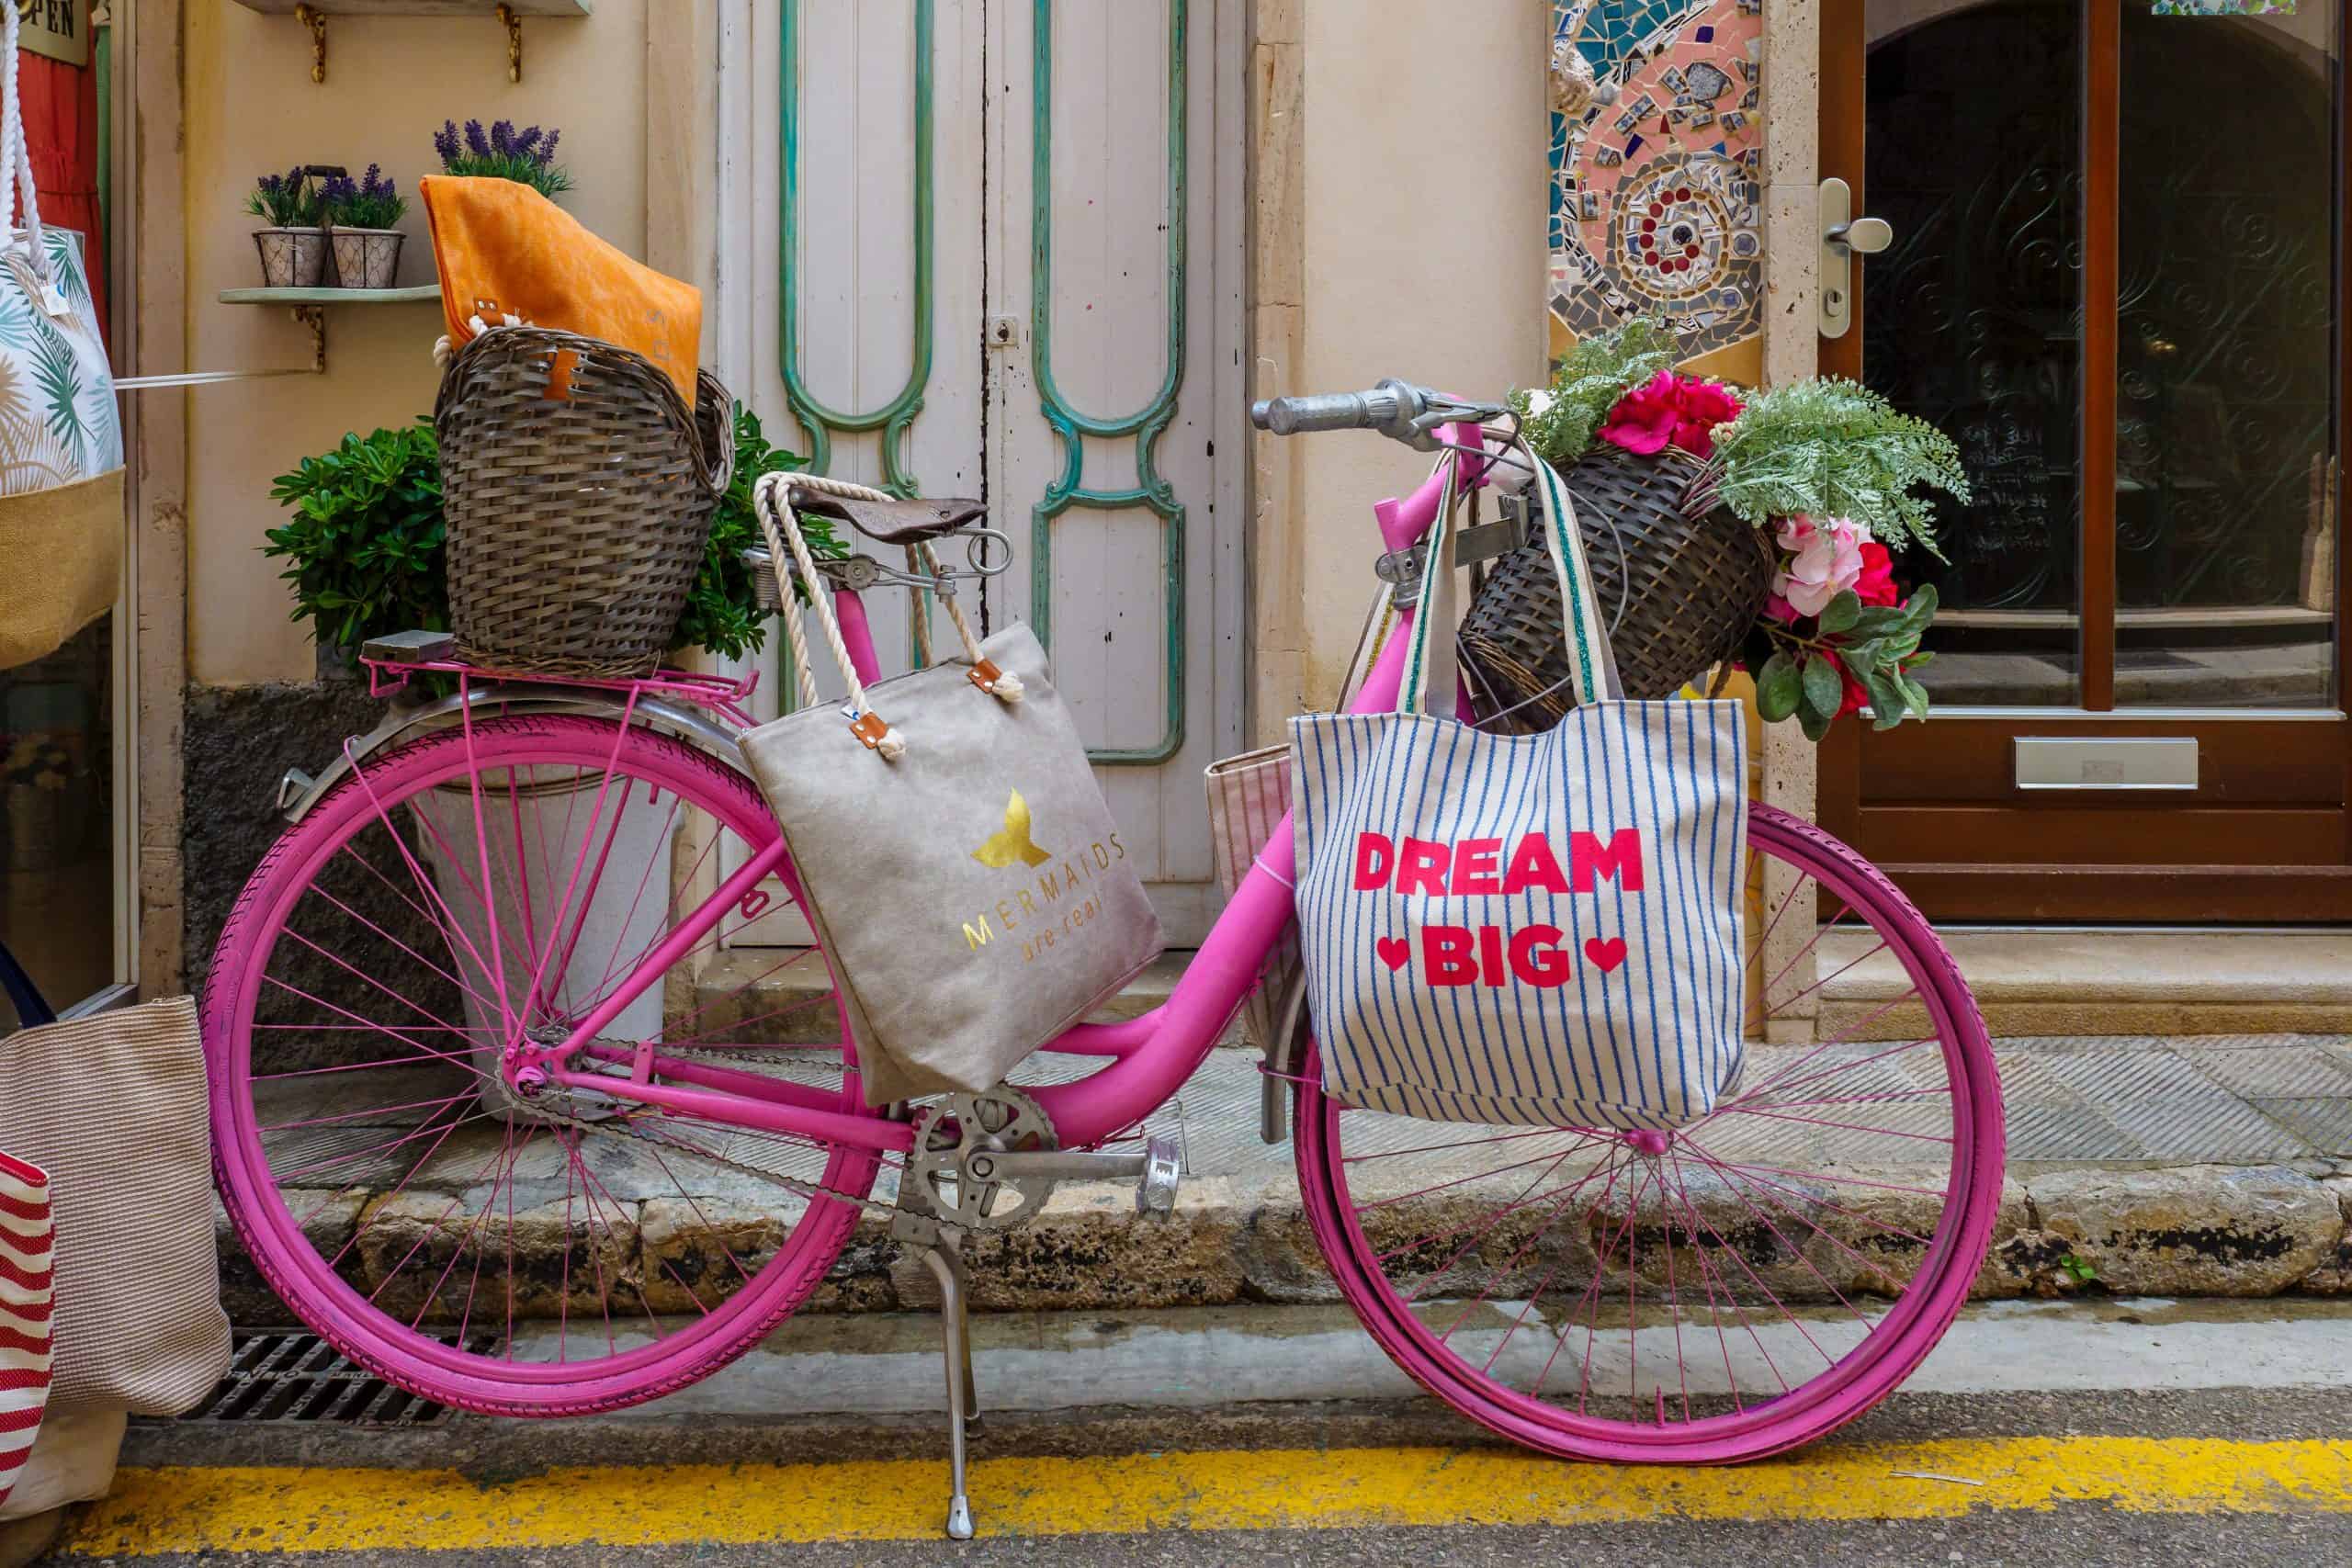 Pink bicycle parked in front of colorful house